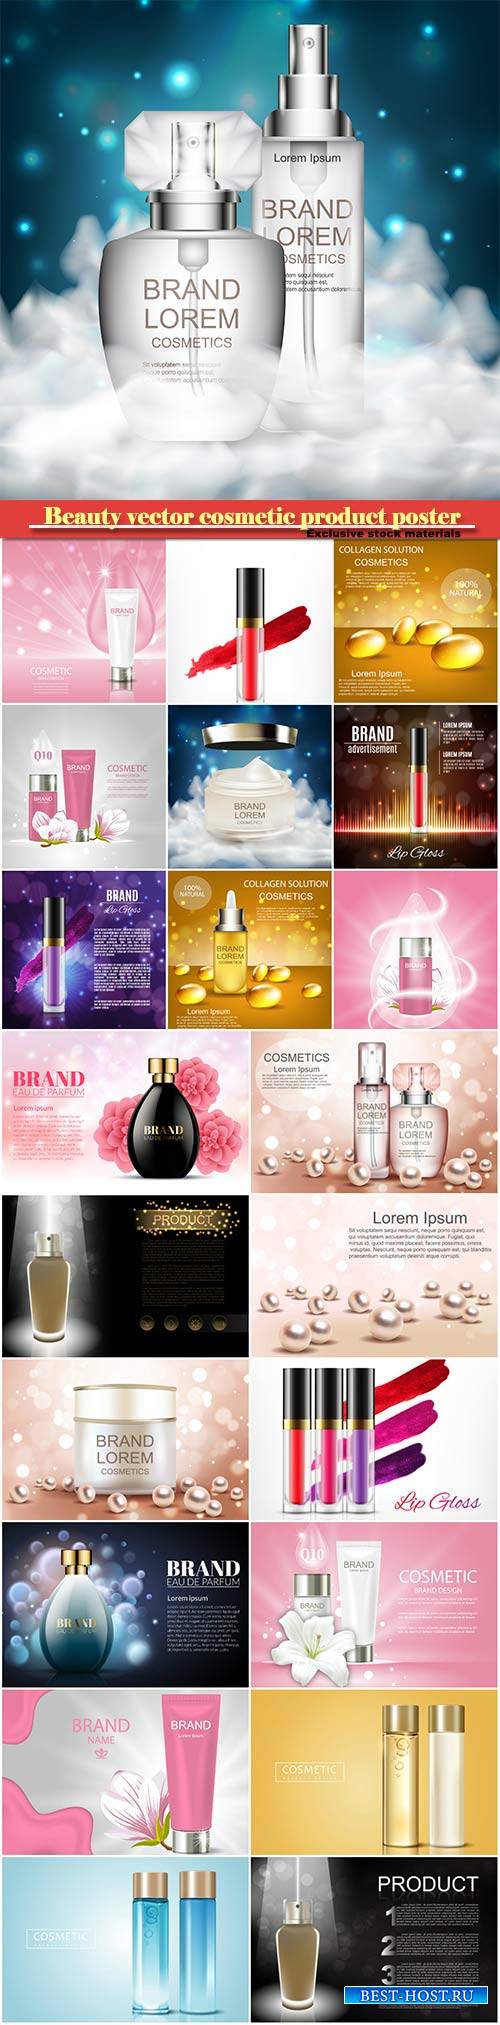 Beauty vector cosmetic product poster #2